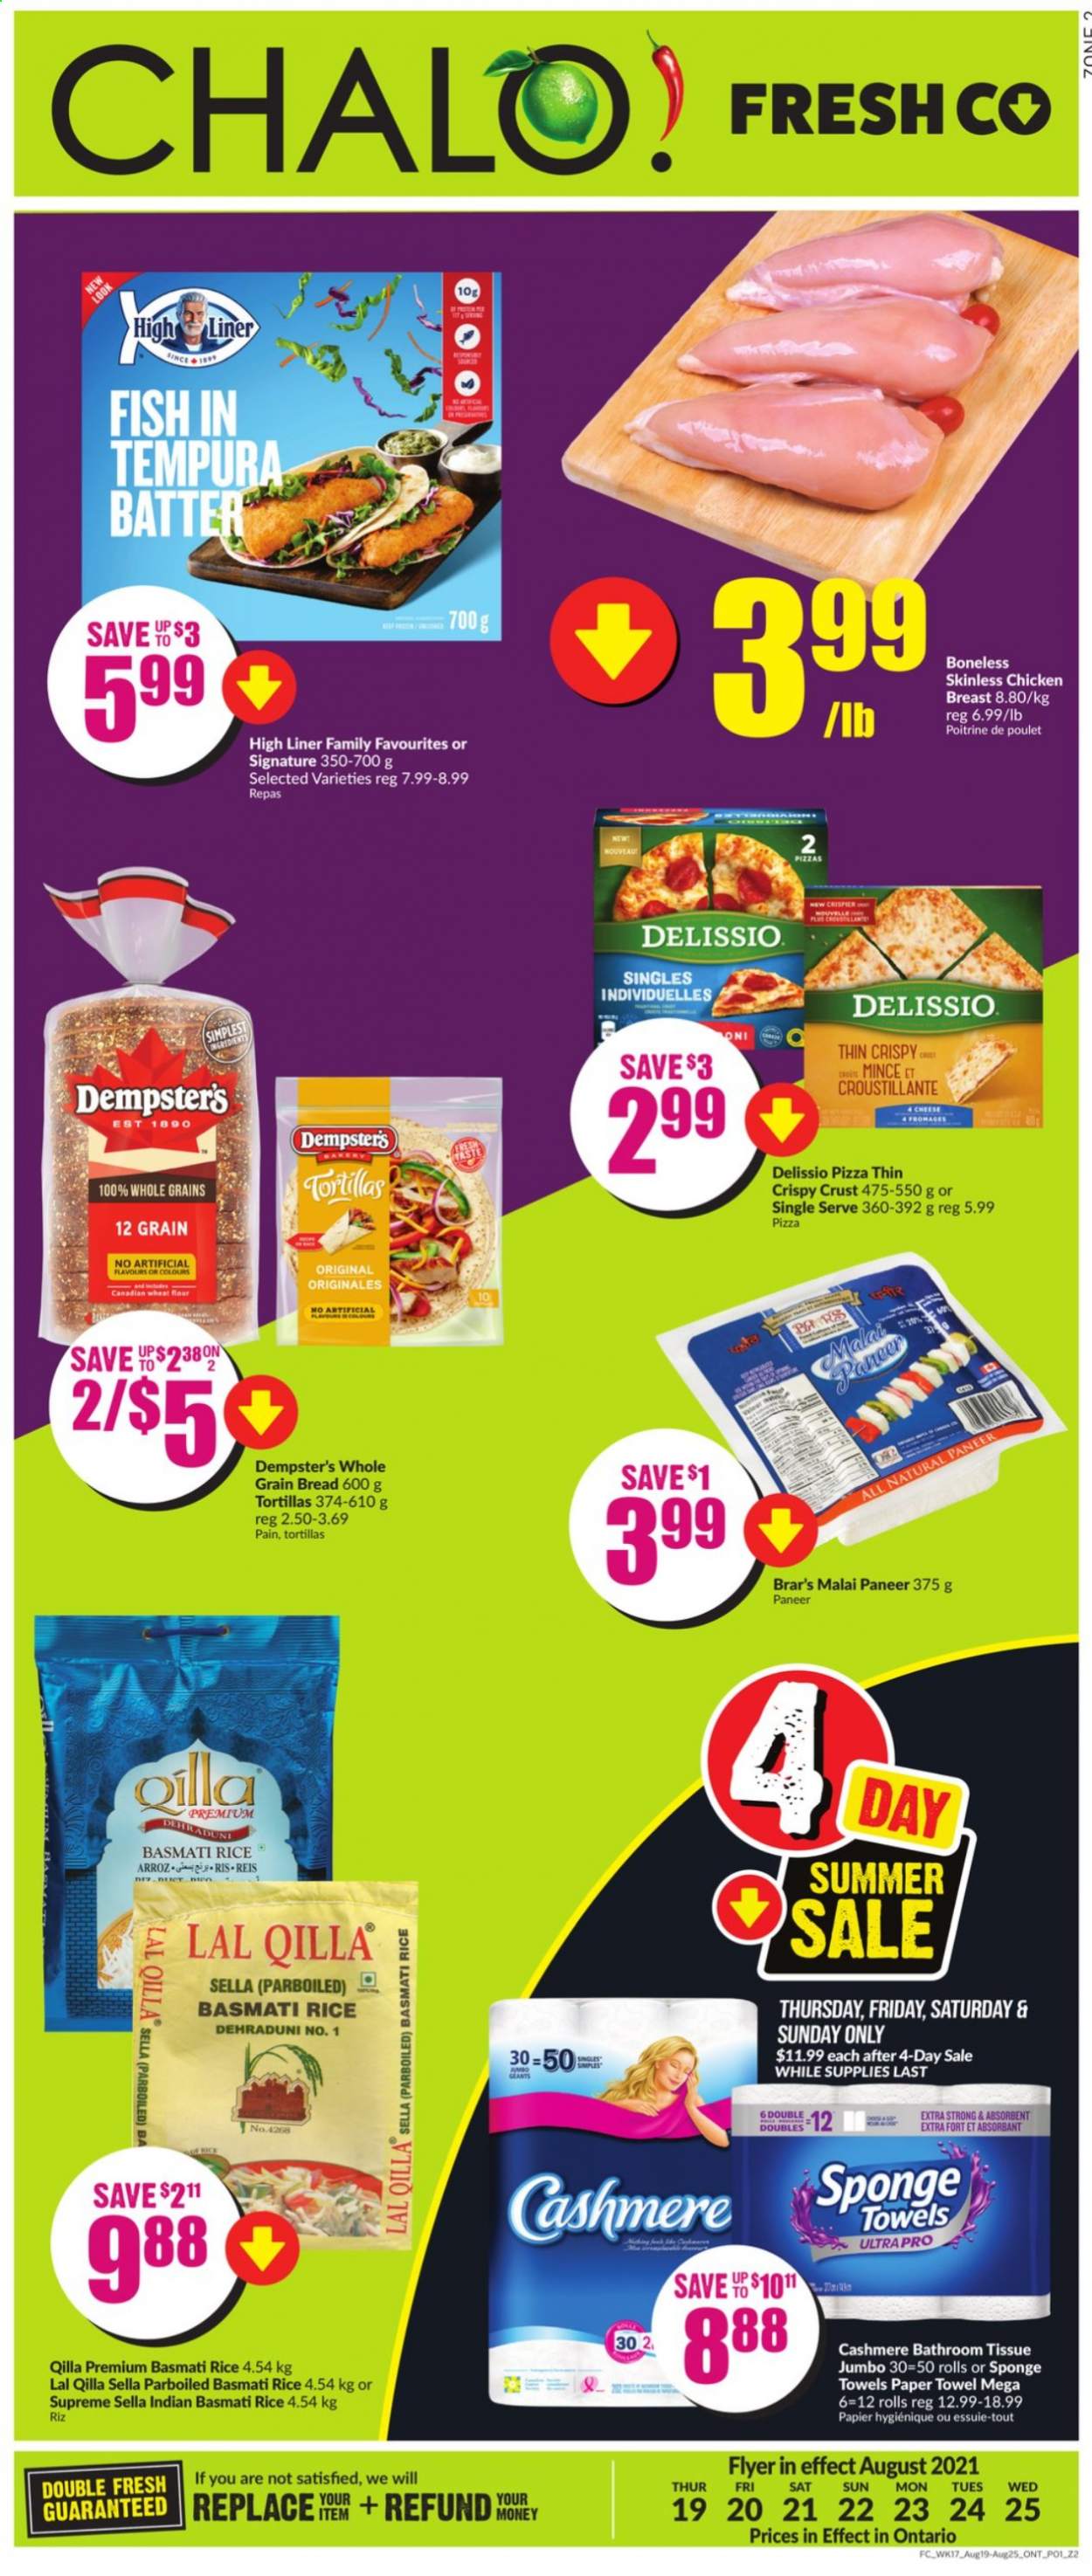 thumbnail - Chalo! FreshCo. Flyer - August 19, 2021 - August 25, 2021 - Sales products - bread, tortillas, fish, pizza, paneer, basmati rice, chicken breasts, chicken. Page 1.